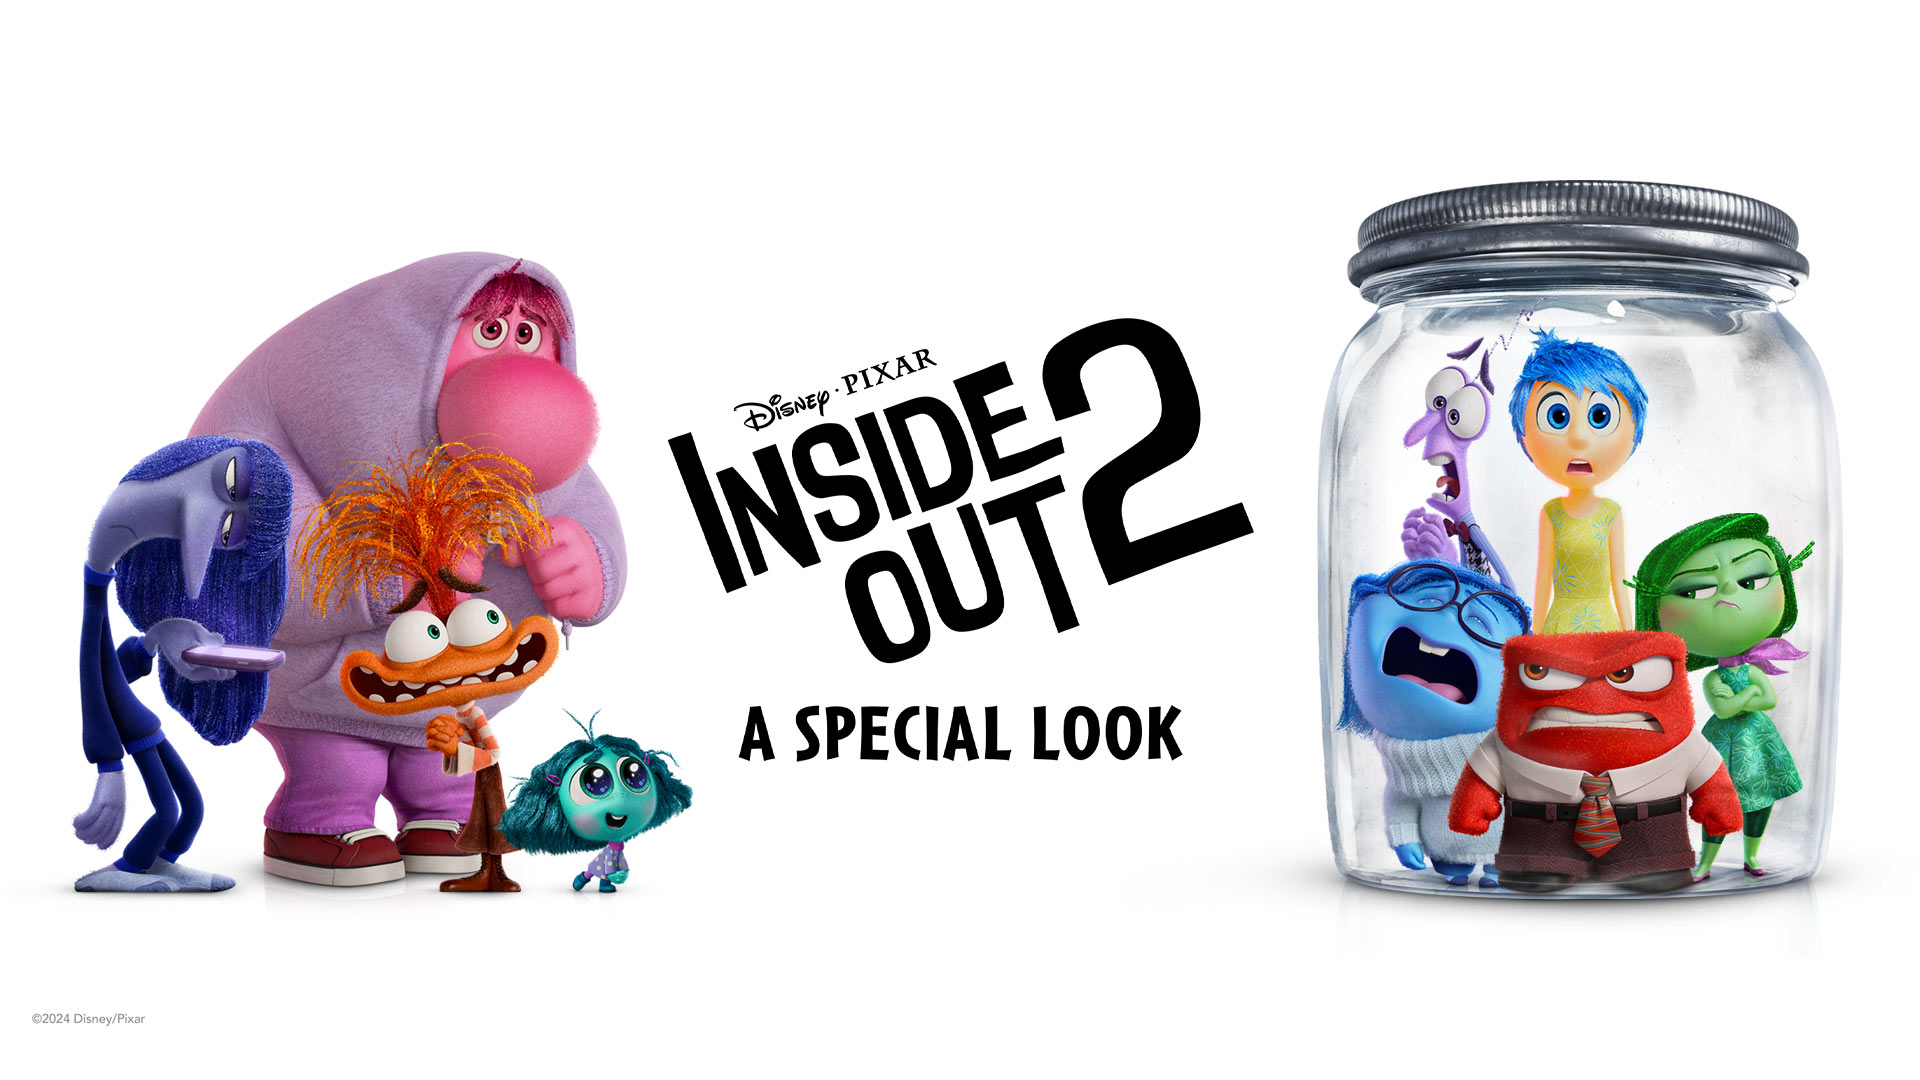 Inside Out 2: A Special Look